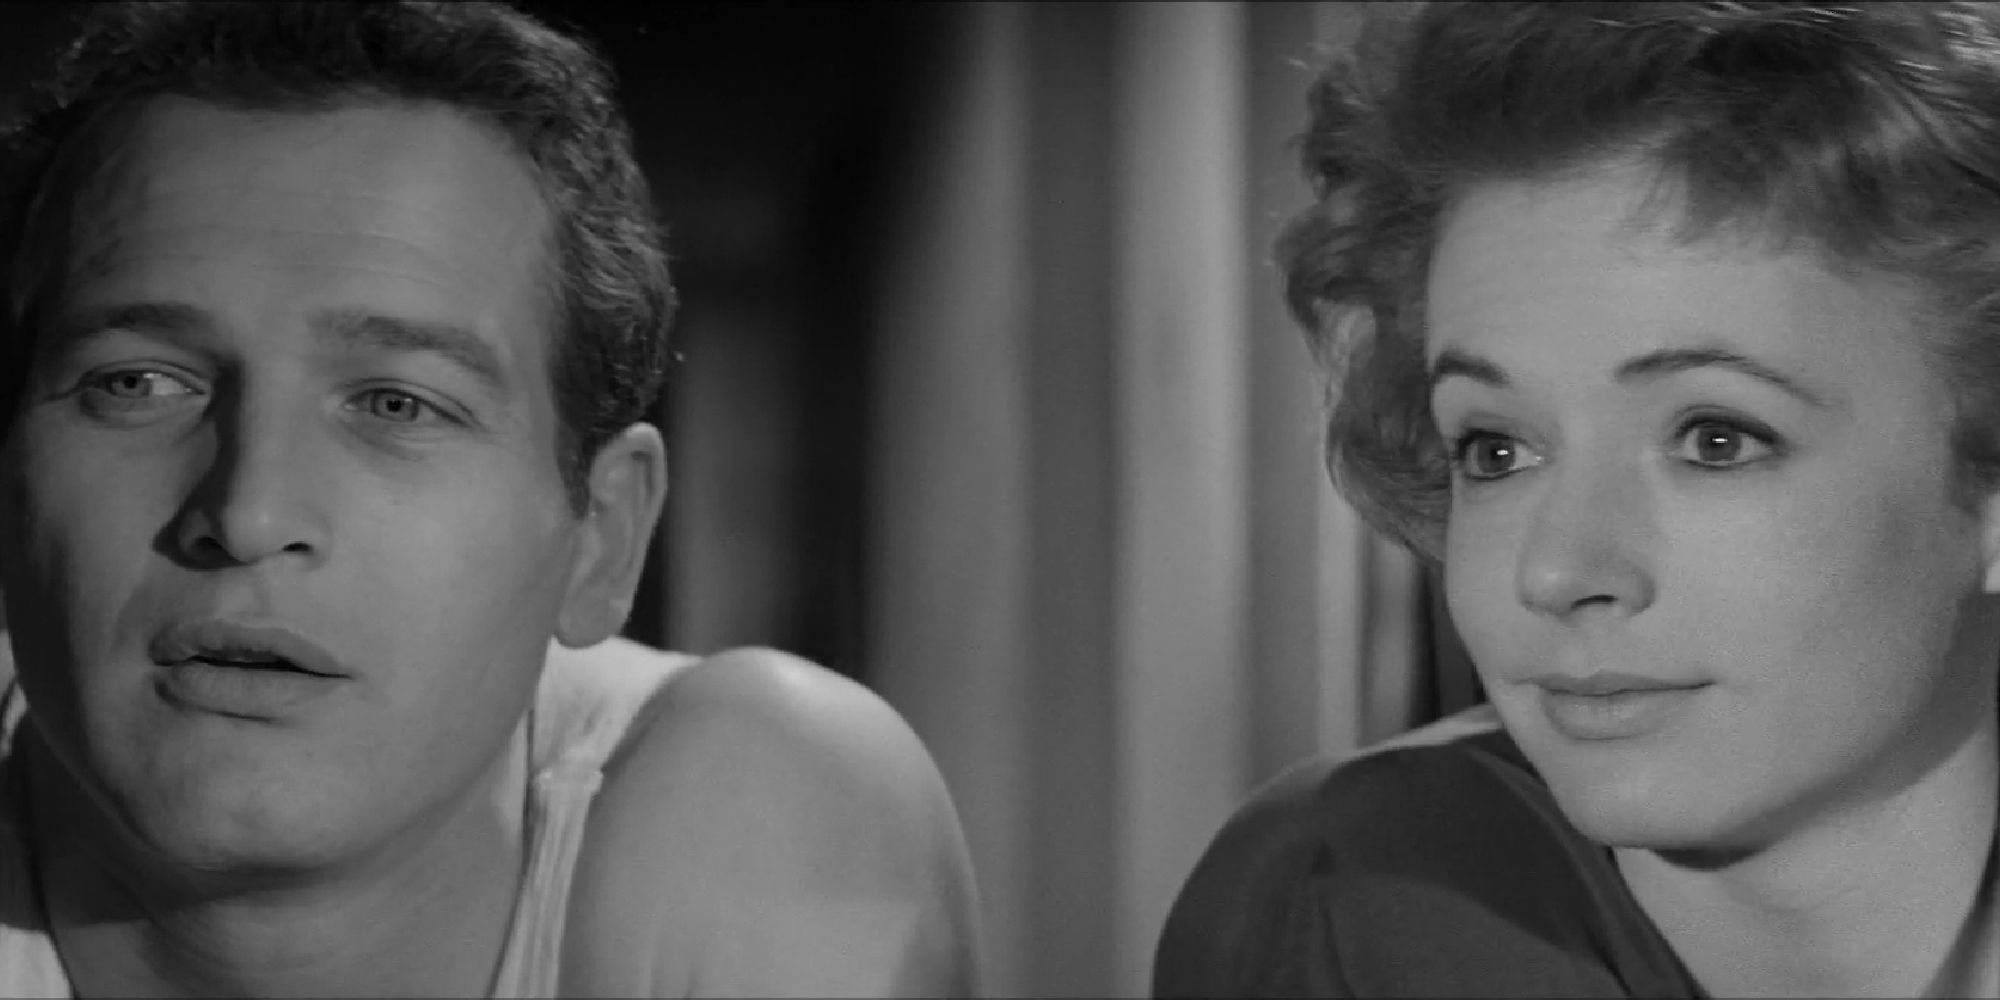 Paul Newman and Piper Laurie as Eddie and Sarah nect to each other looking ahead in the film The Hustler.